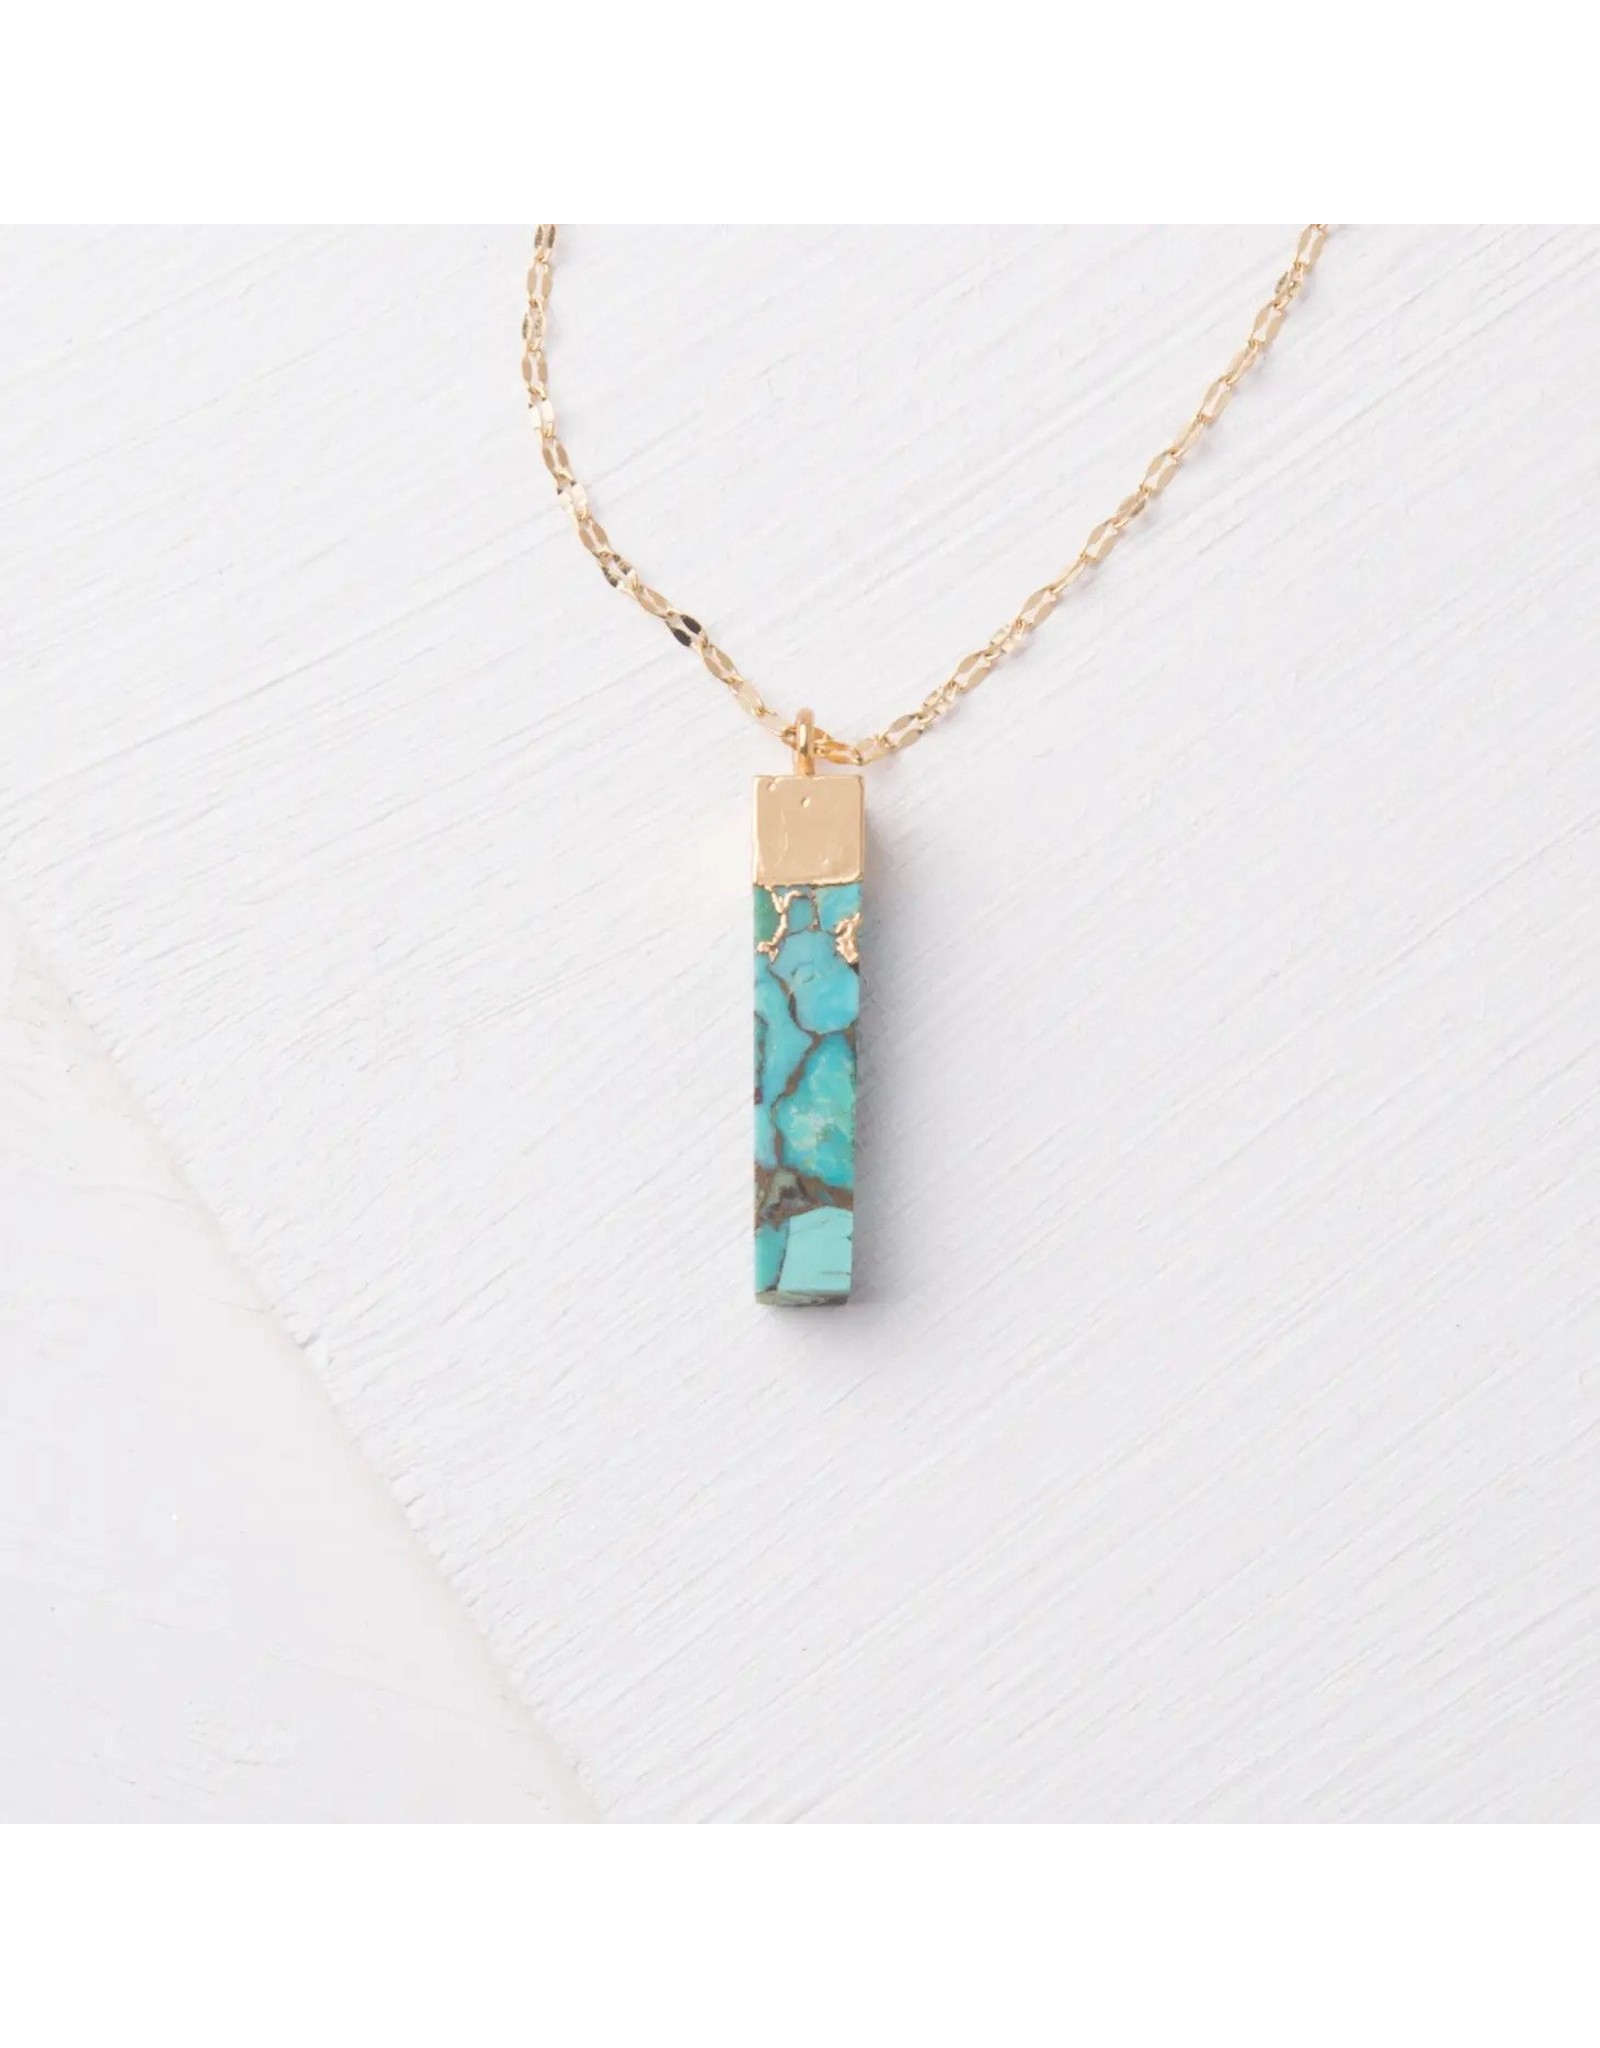 Trade roots Brayden Turquoise Pendant Necklace, Asia